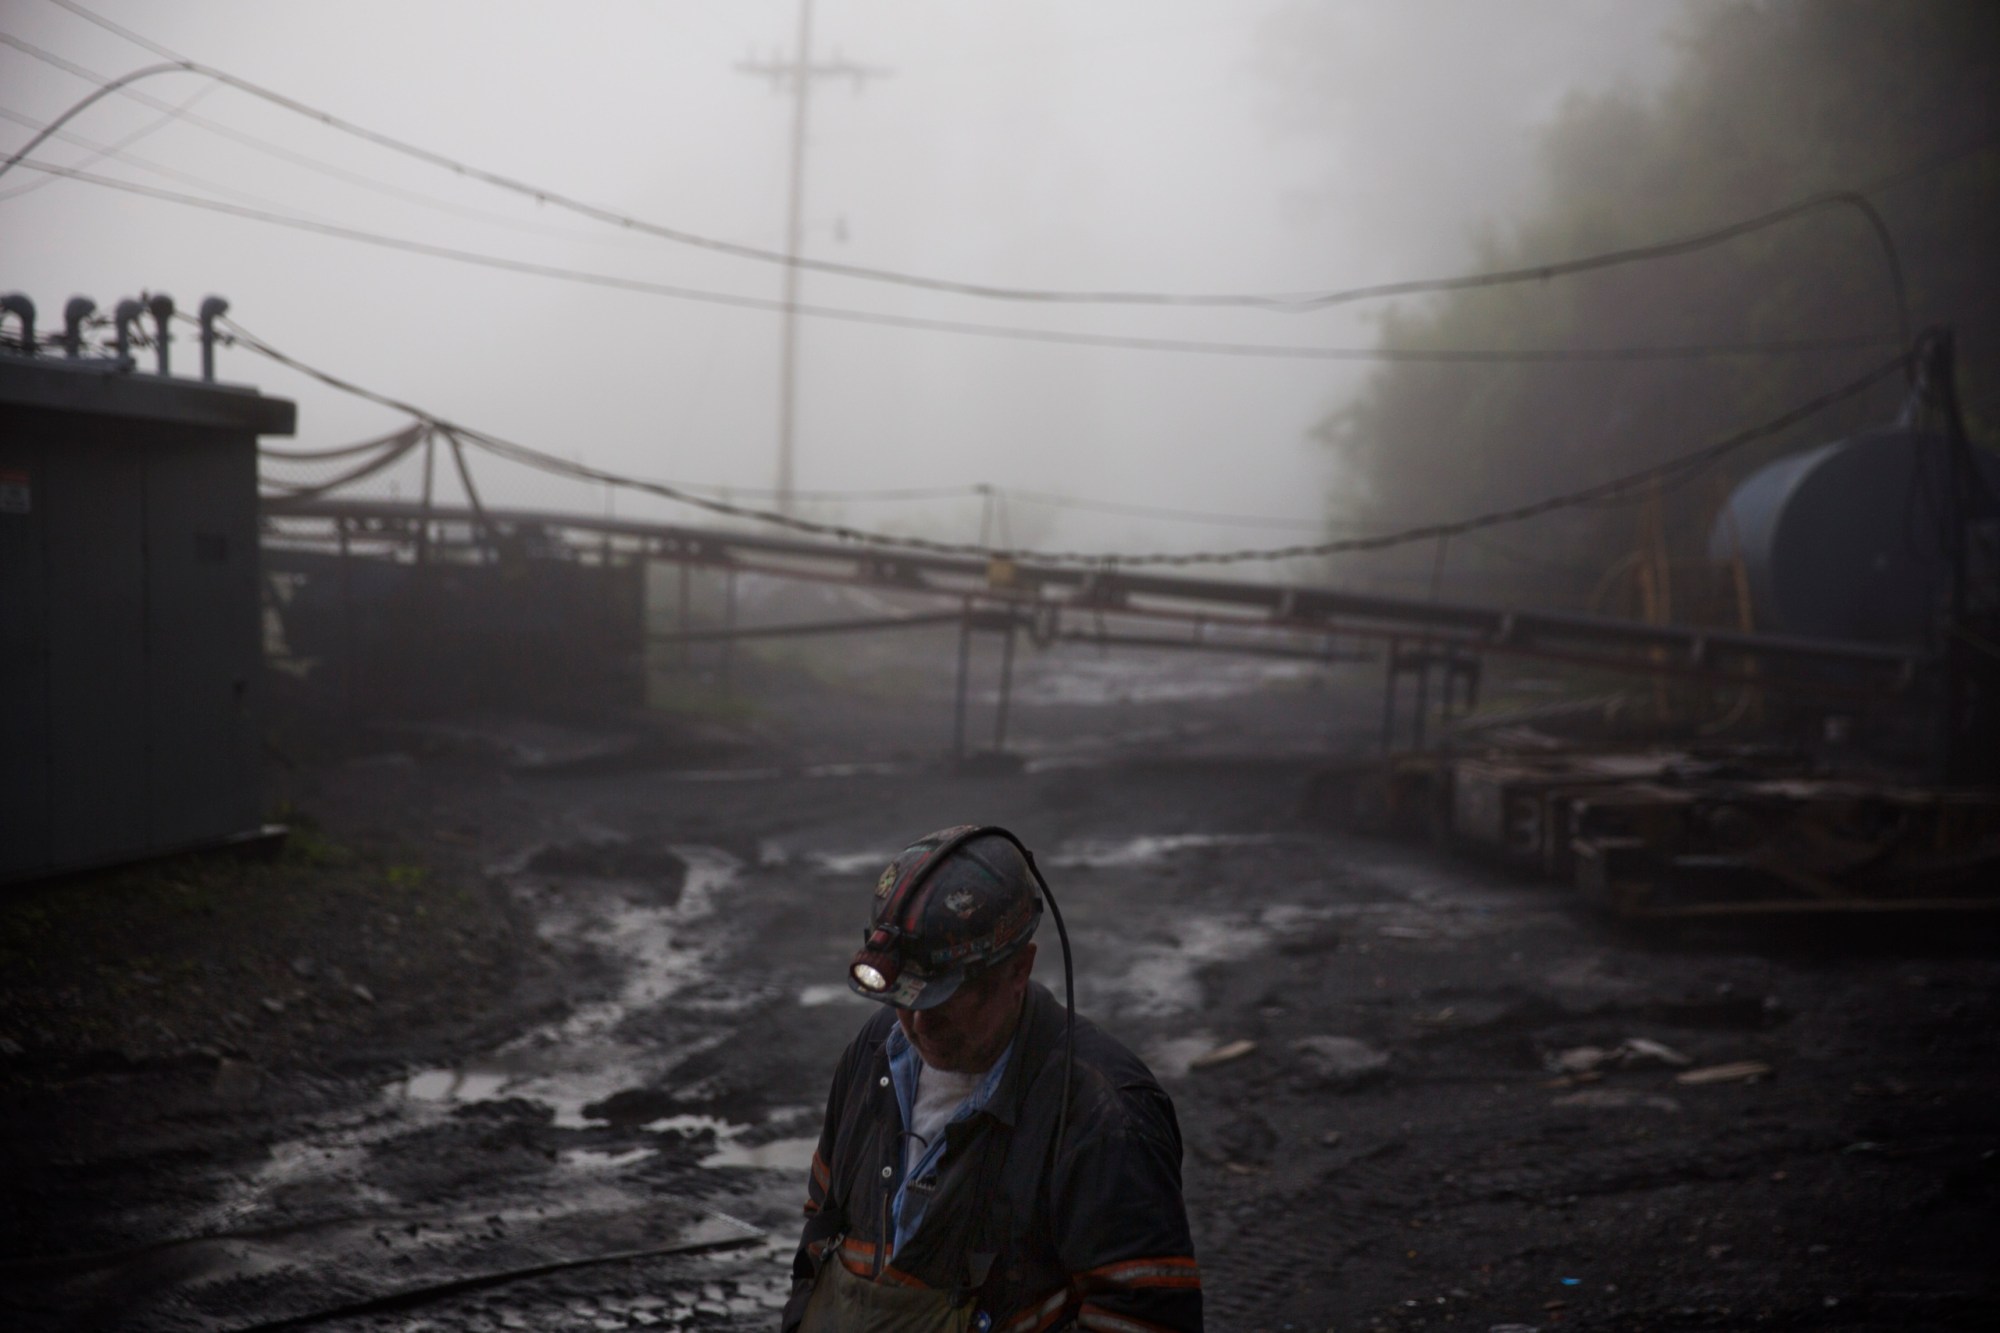 CLIMATE CHANGE: In this Thursday, May 12, 2016 photo, coal miner Scott Tiller walks through the morning fog before going underground in a mine less than 40-inches high in Welch, W.Va. For over a century, life in Central Appalachia has been largely defined by the ups and downs of the coal industry. There is a growing sense in these mountains that for a variety of reasons, economic, environmental, political, coal mining will not rebound this time. Coal's slump is largely the result of cheap natural gas, which now rivals coal as a fuel for generating electricity. Older coal-fired plants are being idled to meet clean-air standards. According to the Labor Department, there were 56,700 jobs in coal mining in March, down from 84,600 in March 2009, shortly after President Barack Obama entered office. There are stark differences between the two parties on energy and environment issues that underscore the sky-high stakes for both sides of the debate in the 2016 presidential race. Many environmental groups and Democrats fear a potential rollback of the Obama administrations policies on climate change and renewable energy under a Republican president. Republicans all support coal production and enthusiastically back nuclear energy. They along with business groups are eager to boost oil and gas production following years of frustration with Obama. (AP Photo/David Goldman)